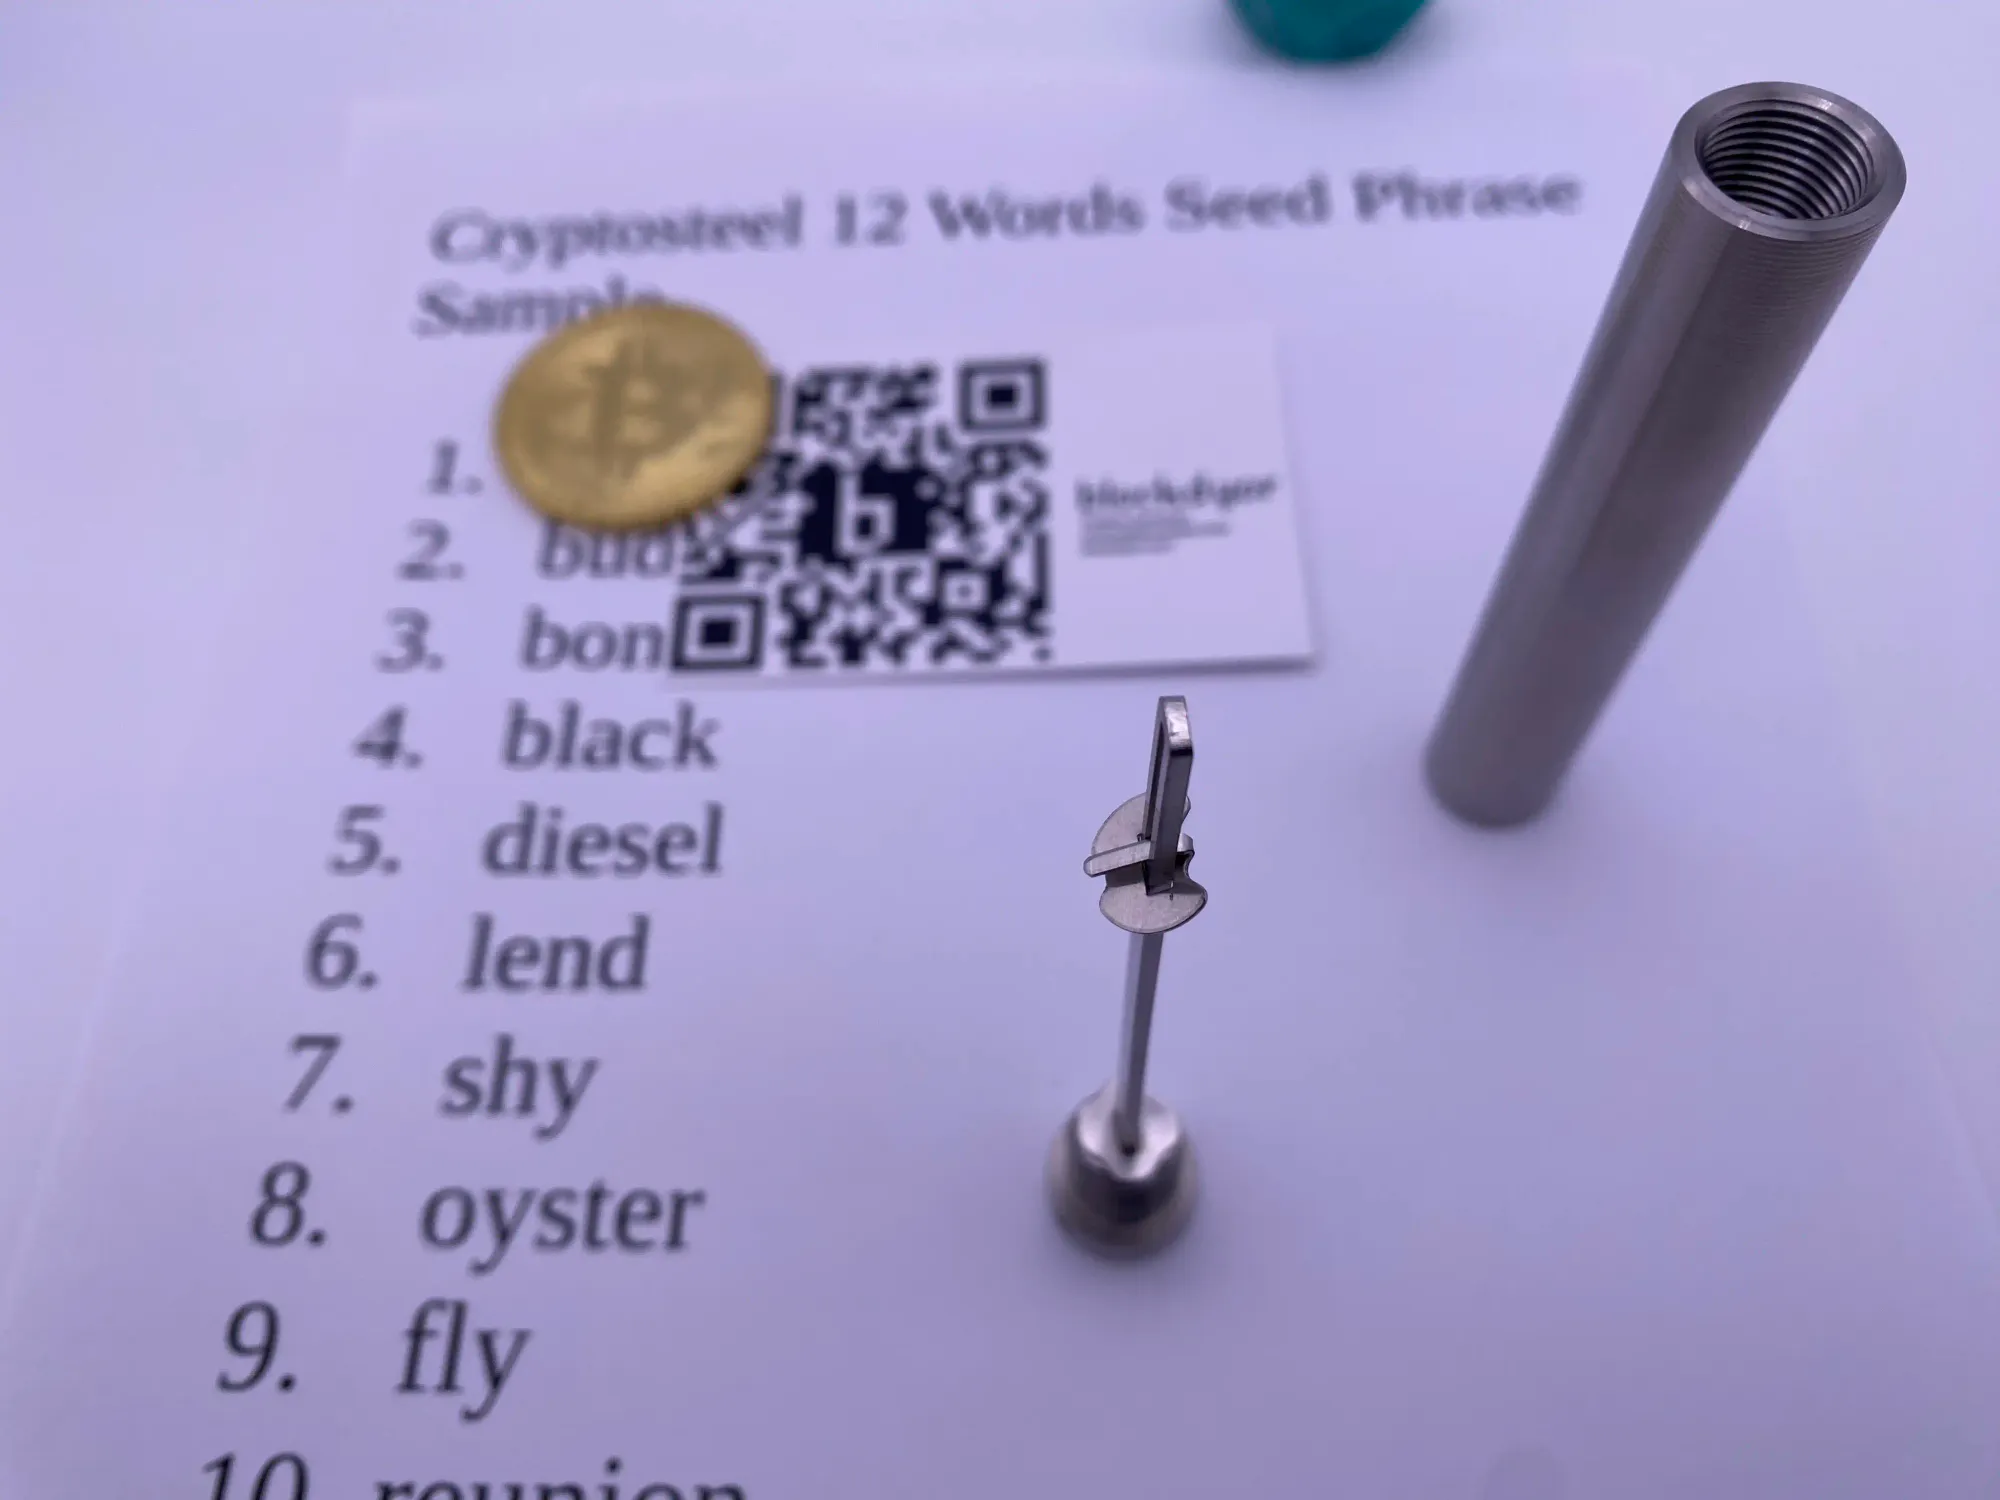 Entering a Recovery Seed Phrase Into A Cryptosteel Capsule Step 11